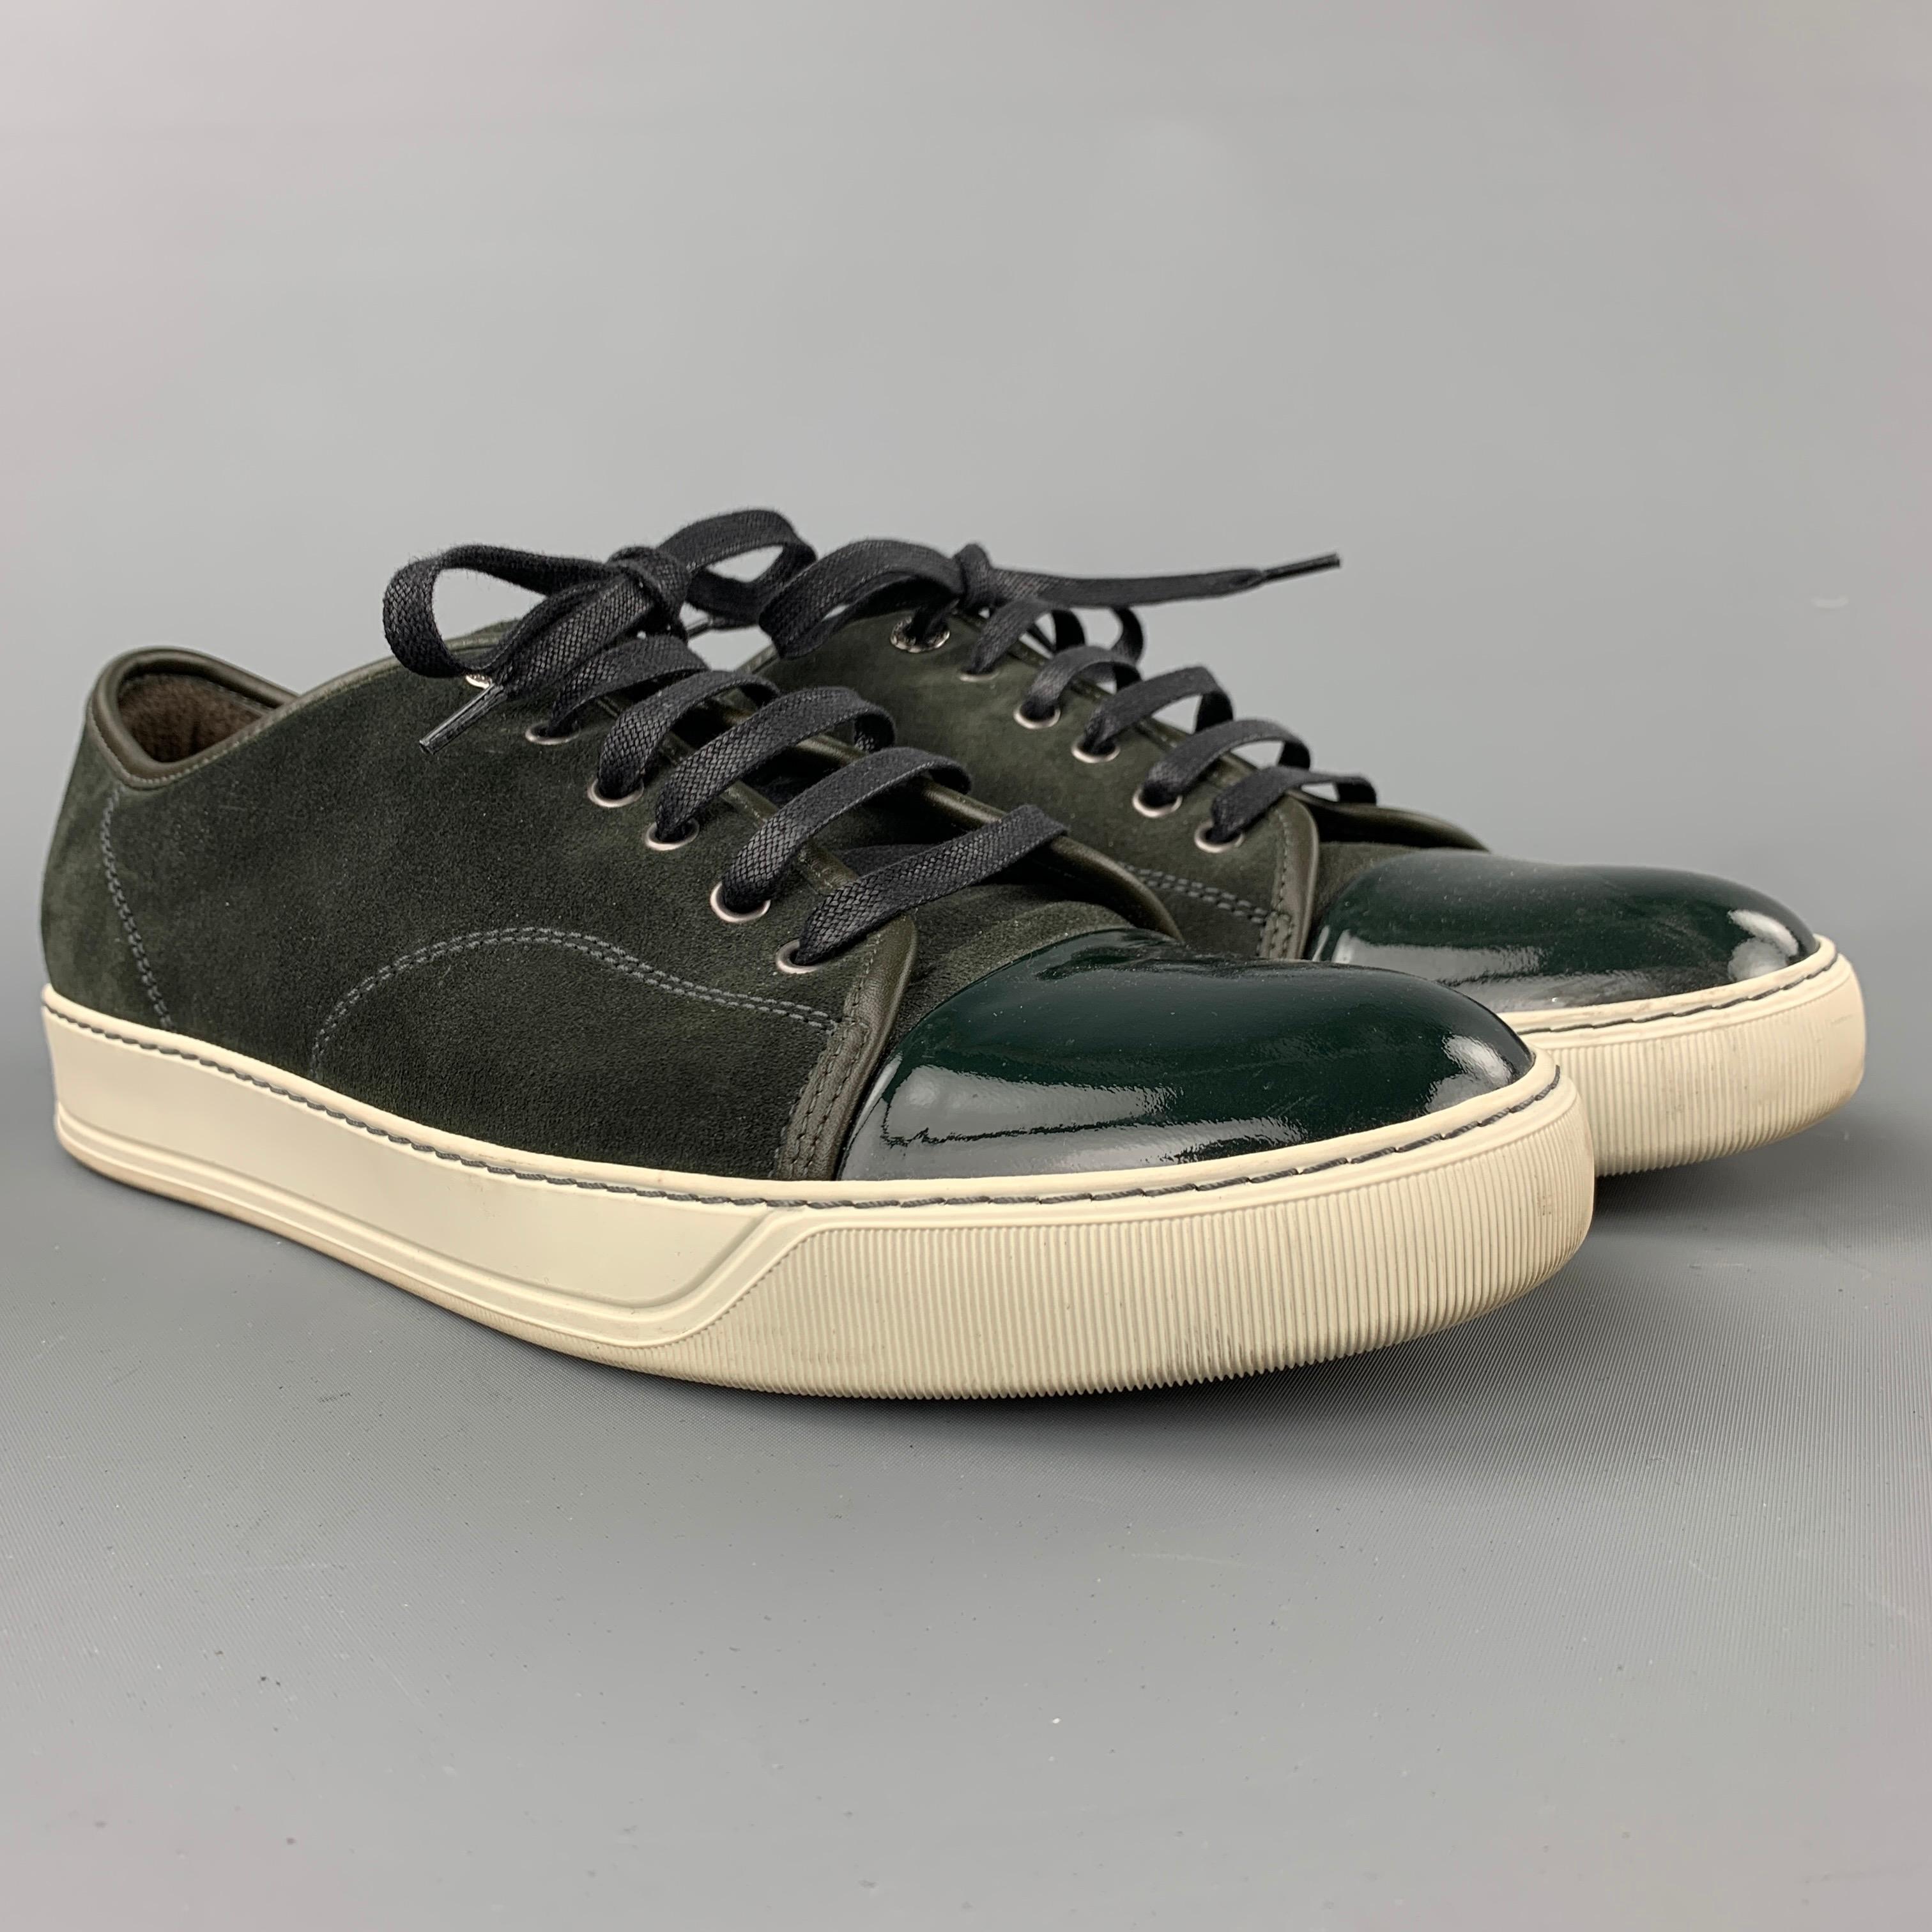 LANVIN sneakers coms in a olive suede with a patent leather toe design featuring a cap te, rubber sole, and a lace up closure. Made in Portugal.

Very Good Pre-Owned Condition.
Marked: 10

Outsole: 12 in. x 4 in. 